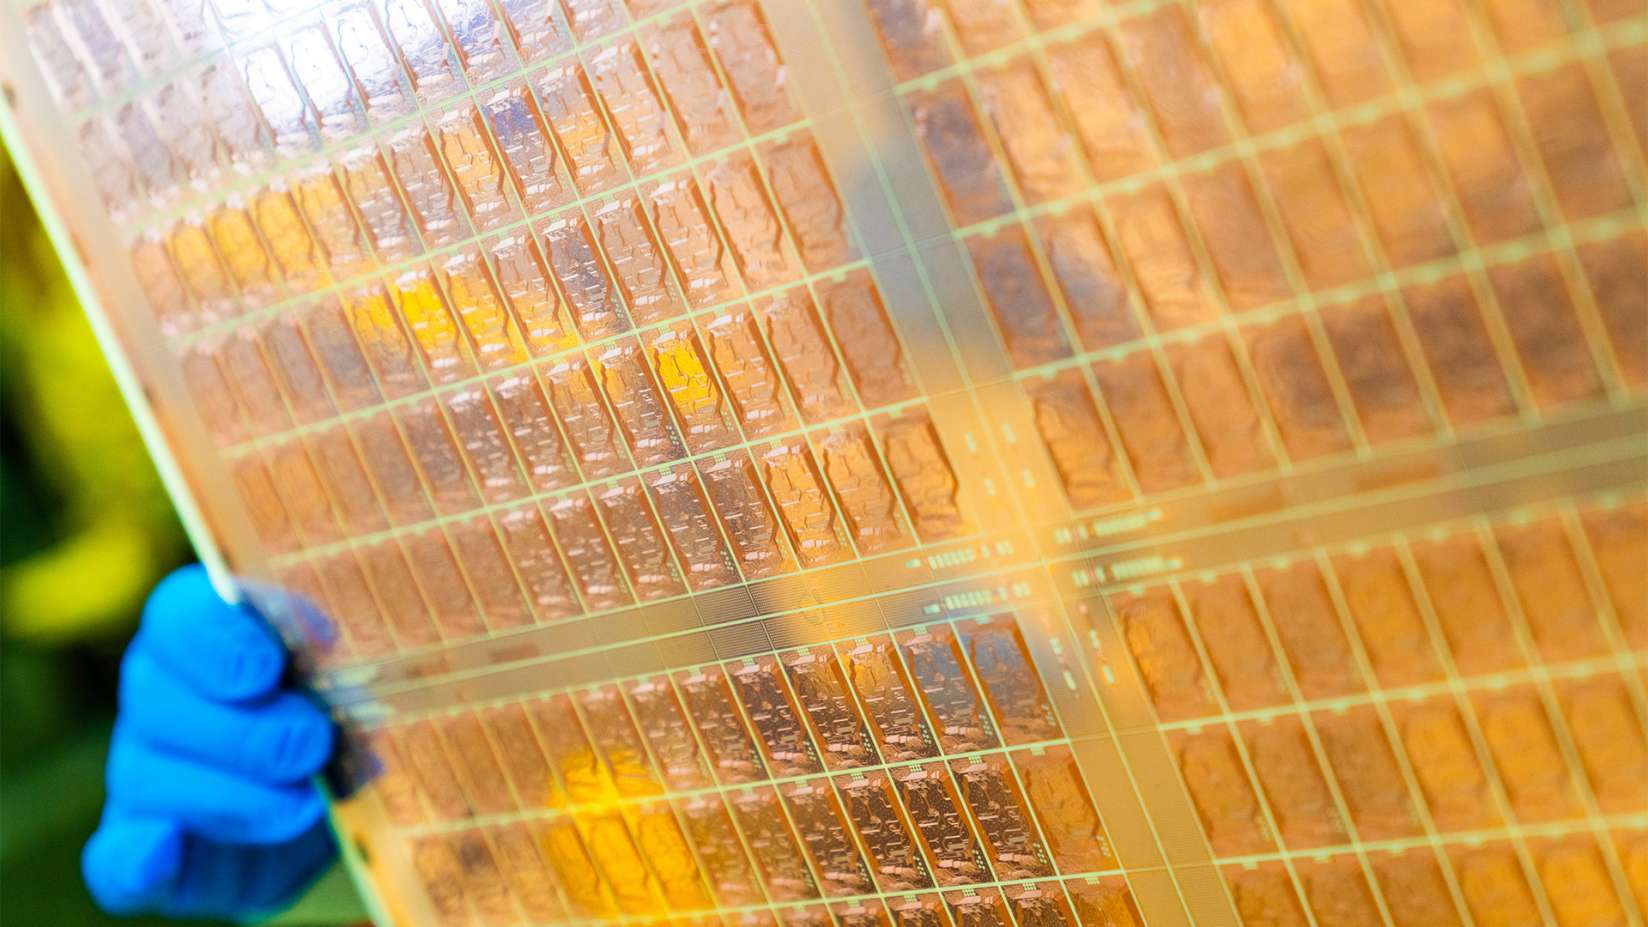 Intel delivers industry-leading advanced packaging that enables performance, cost and scaling benefits for Intel and Intel Foundry Services customers. (Photo credit: Intel)